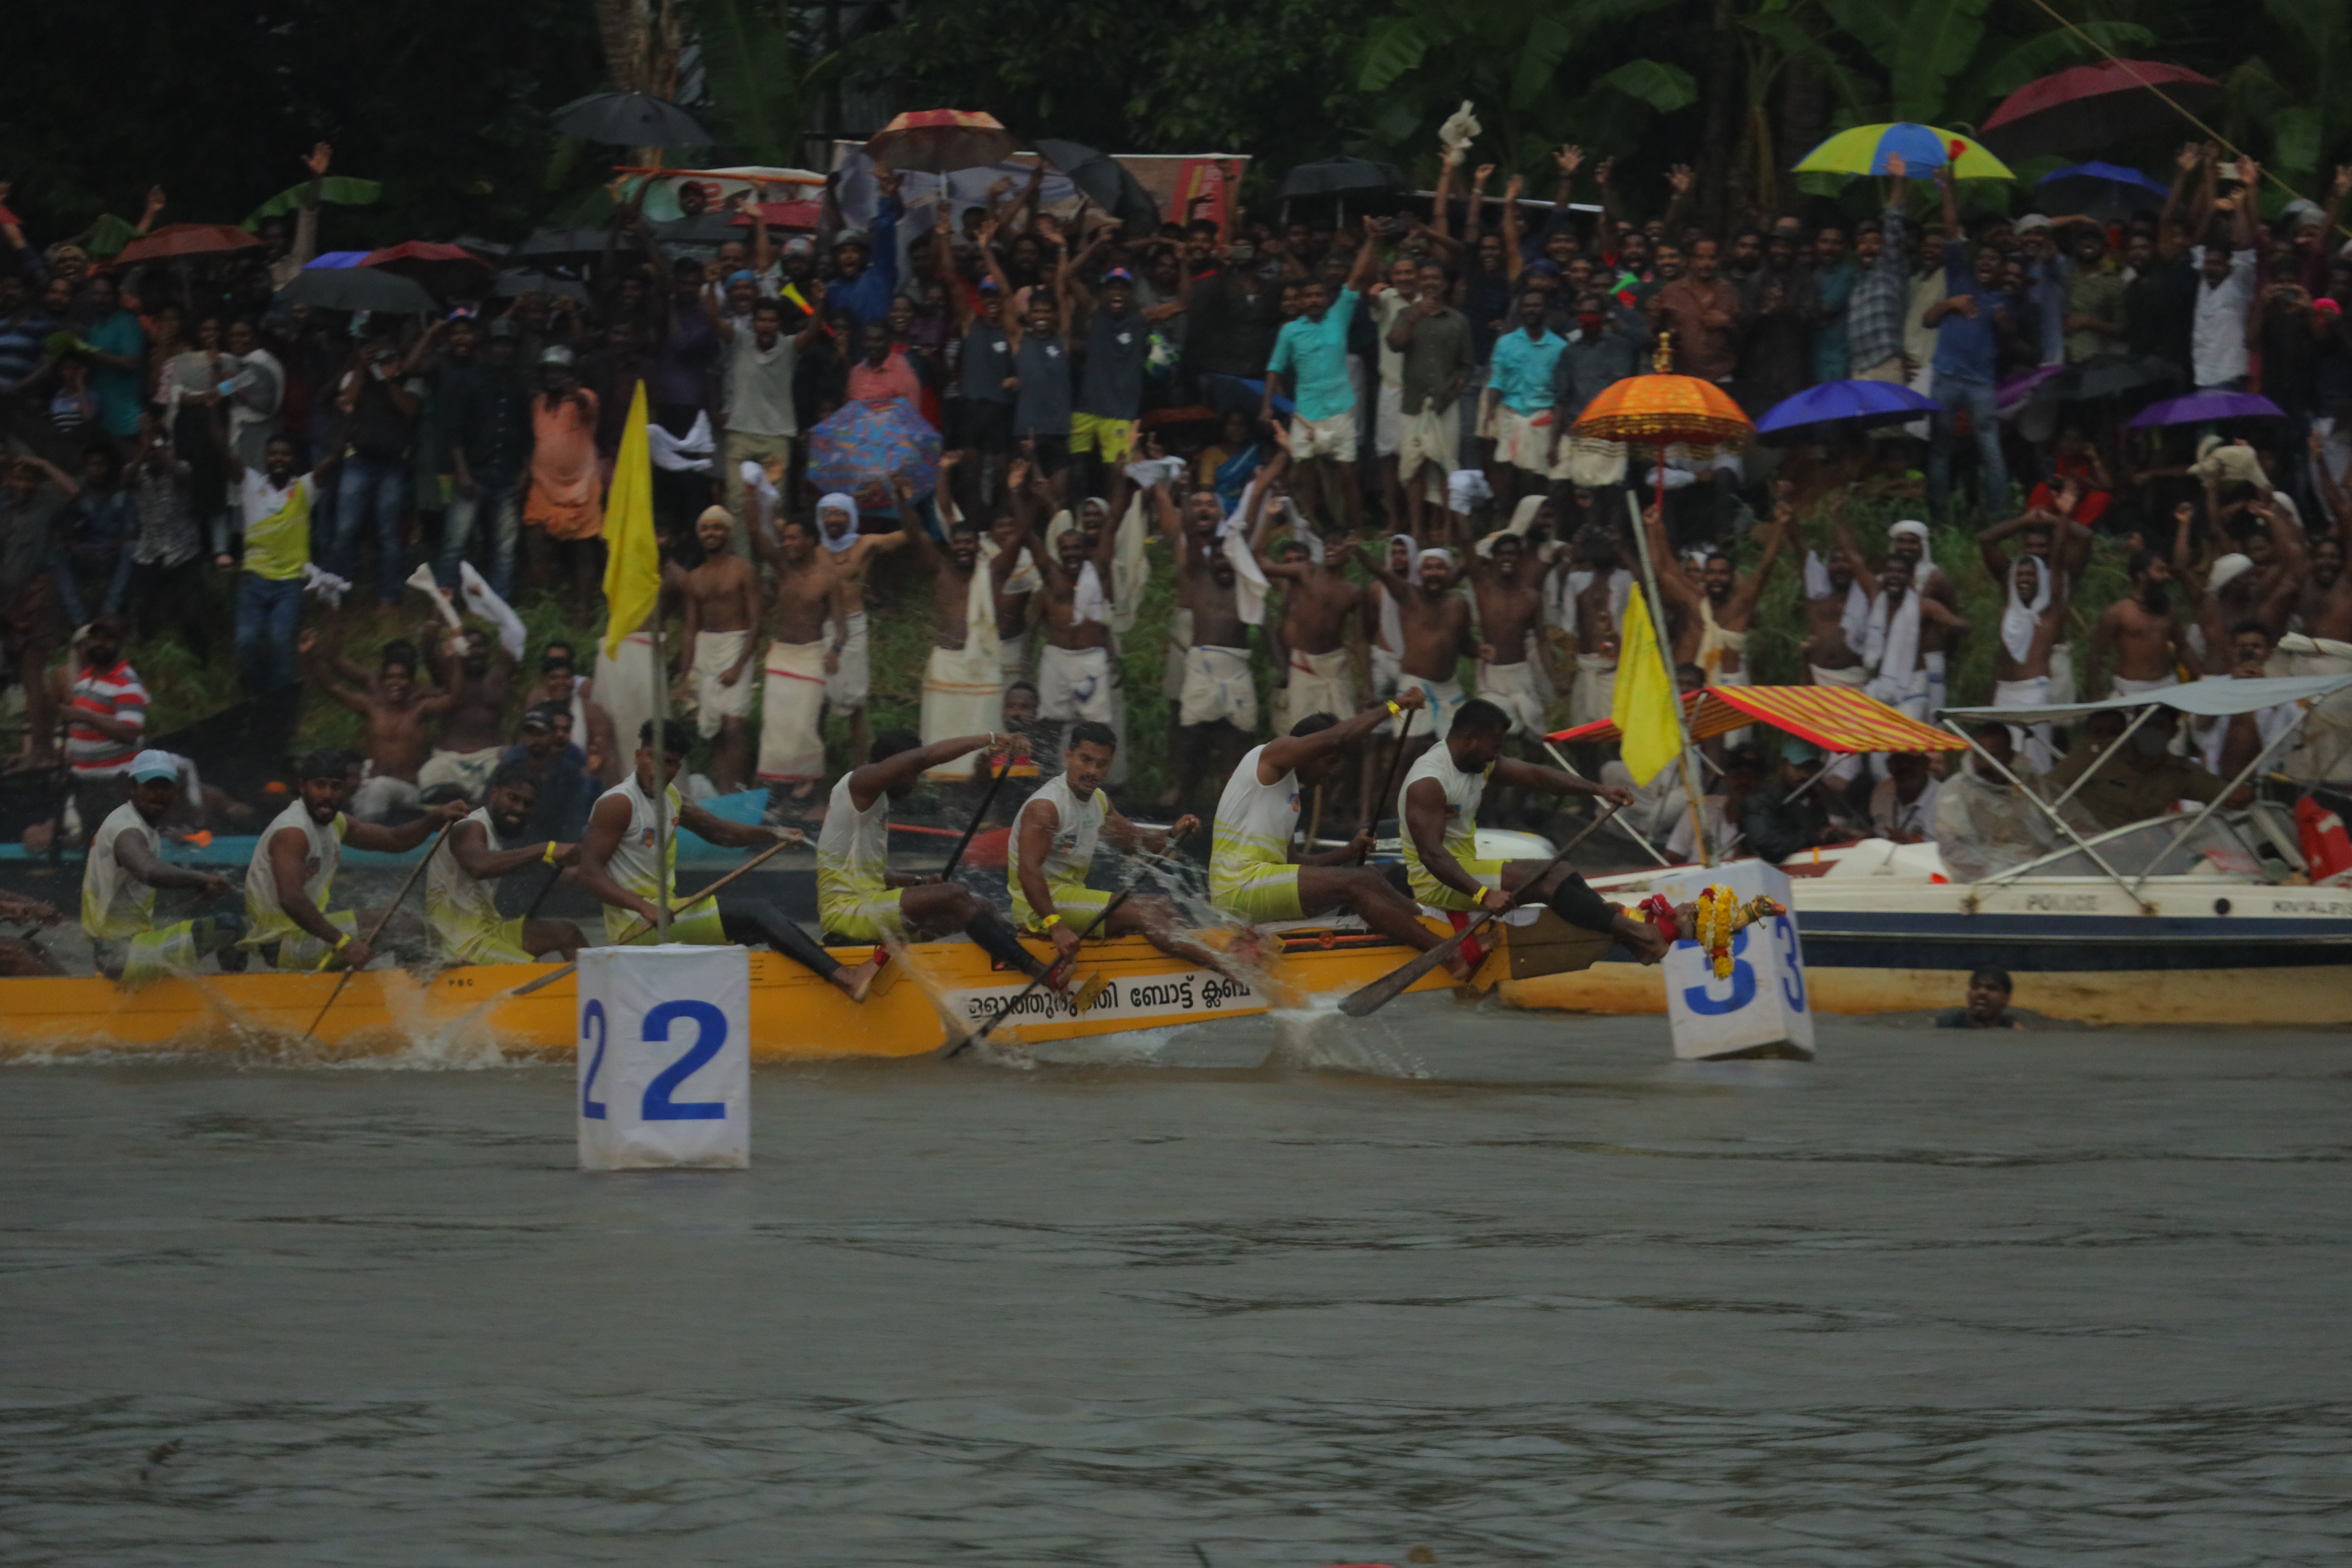 CBL-2: Tropical Titans snatch fag-end victory to win at Pandanad  Narrow miss pushes Mighty Oars to 2nd; Raging Rowers are 3rd